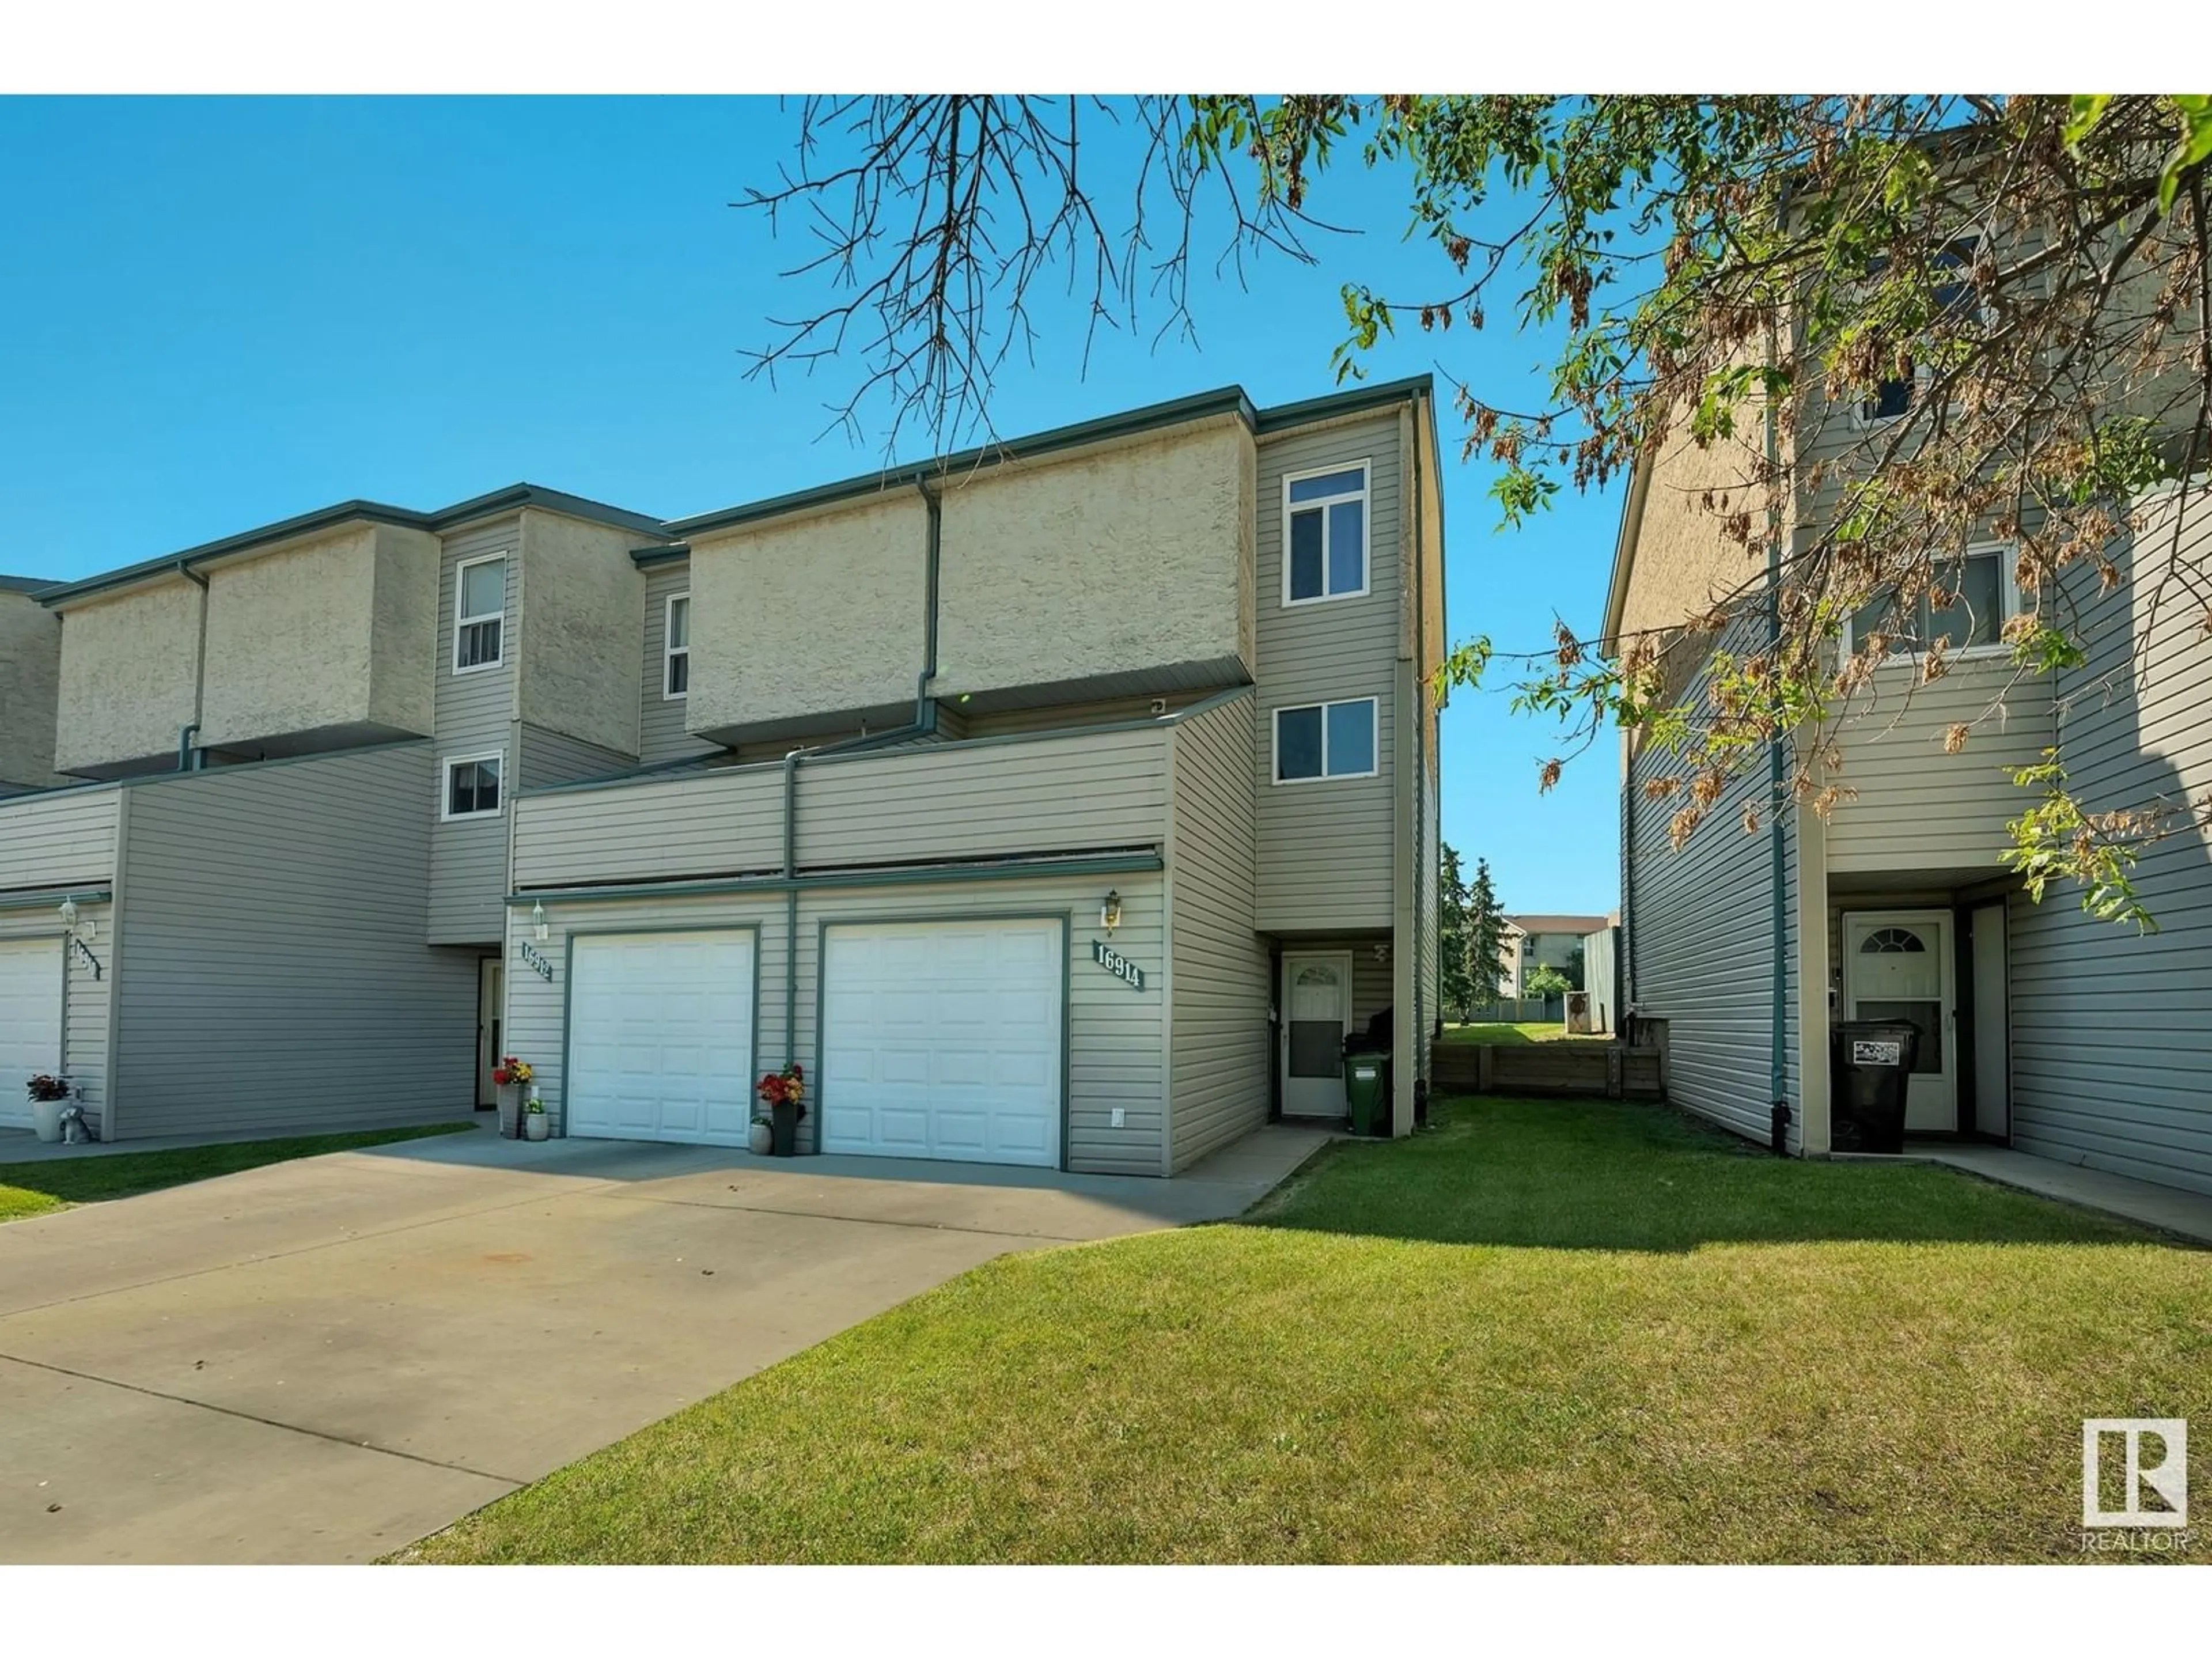 A pic from exterior of the house or condo for 16914 109 street NW, Edmonton Alberta T5X2J3